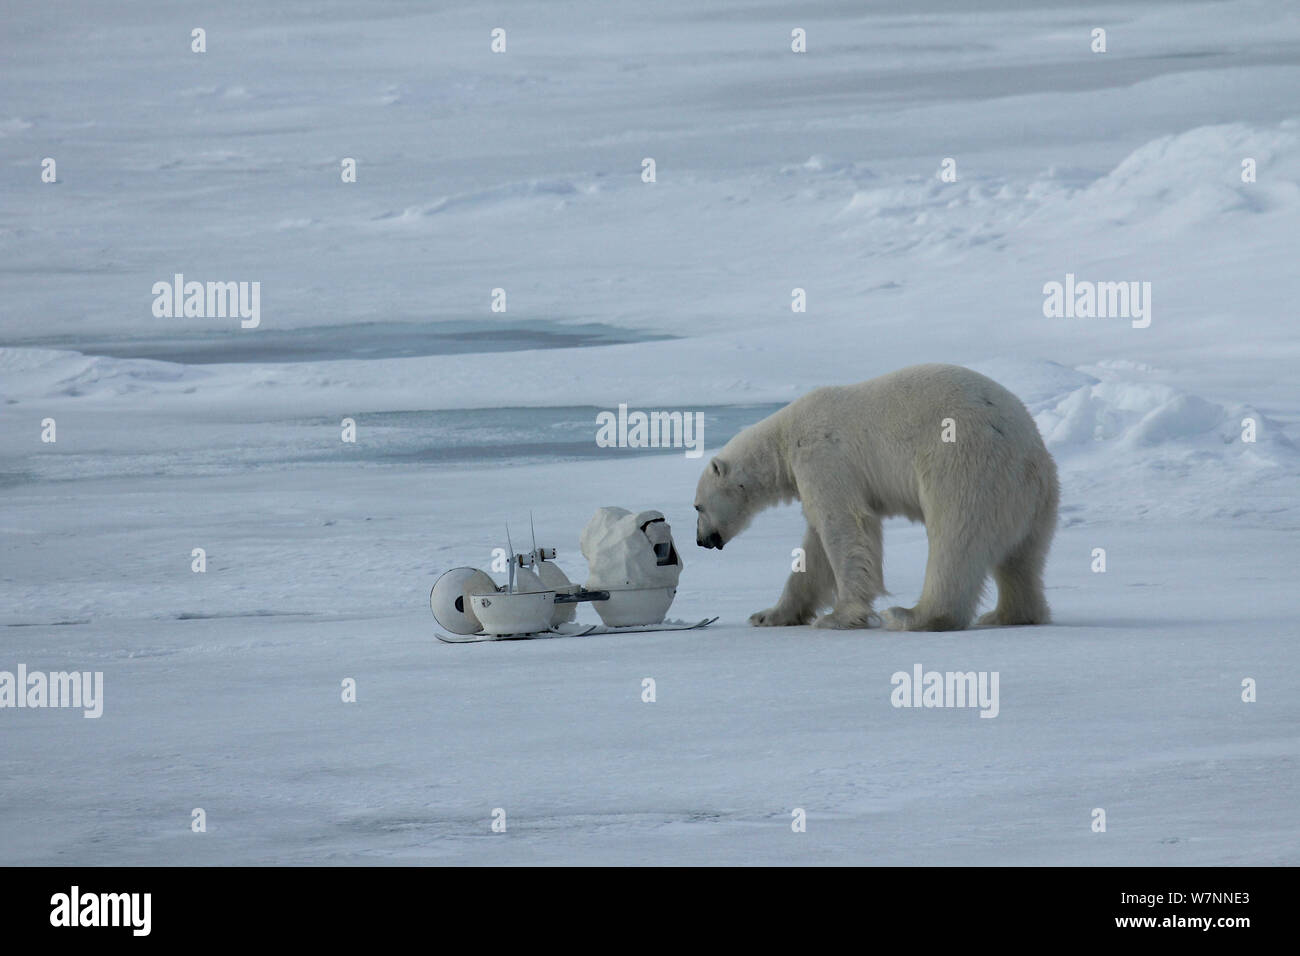 Polar bear (Ursus maritimus) investigating 'Blizzard cam' remote camera used for filming polar bears, Svalbard, Norway, taken on location for 'Polar Bear : Spy on the Ice' August 2010 Stock Photo